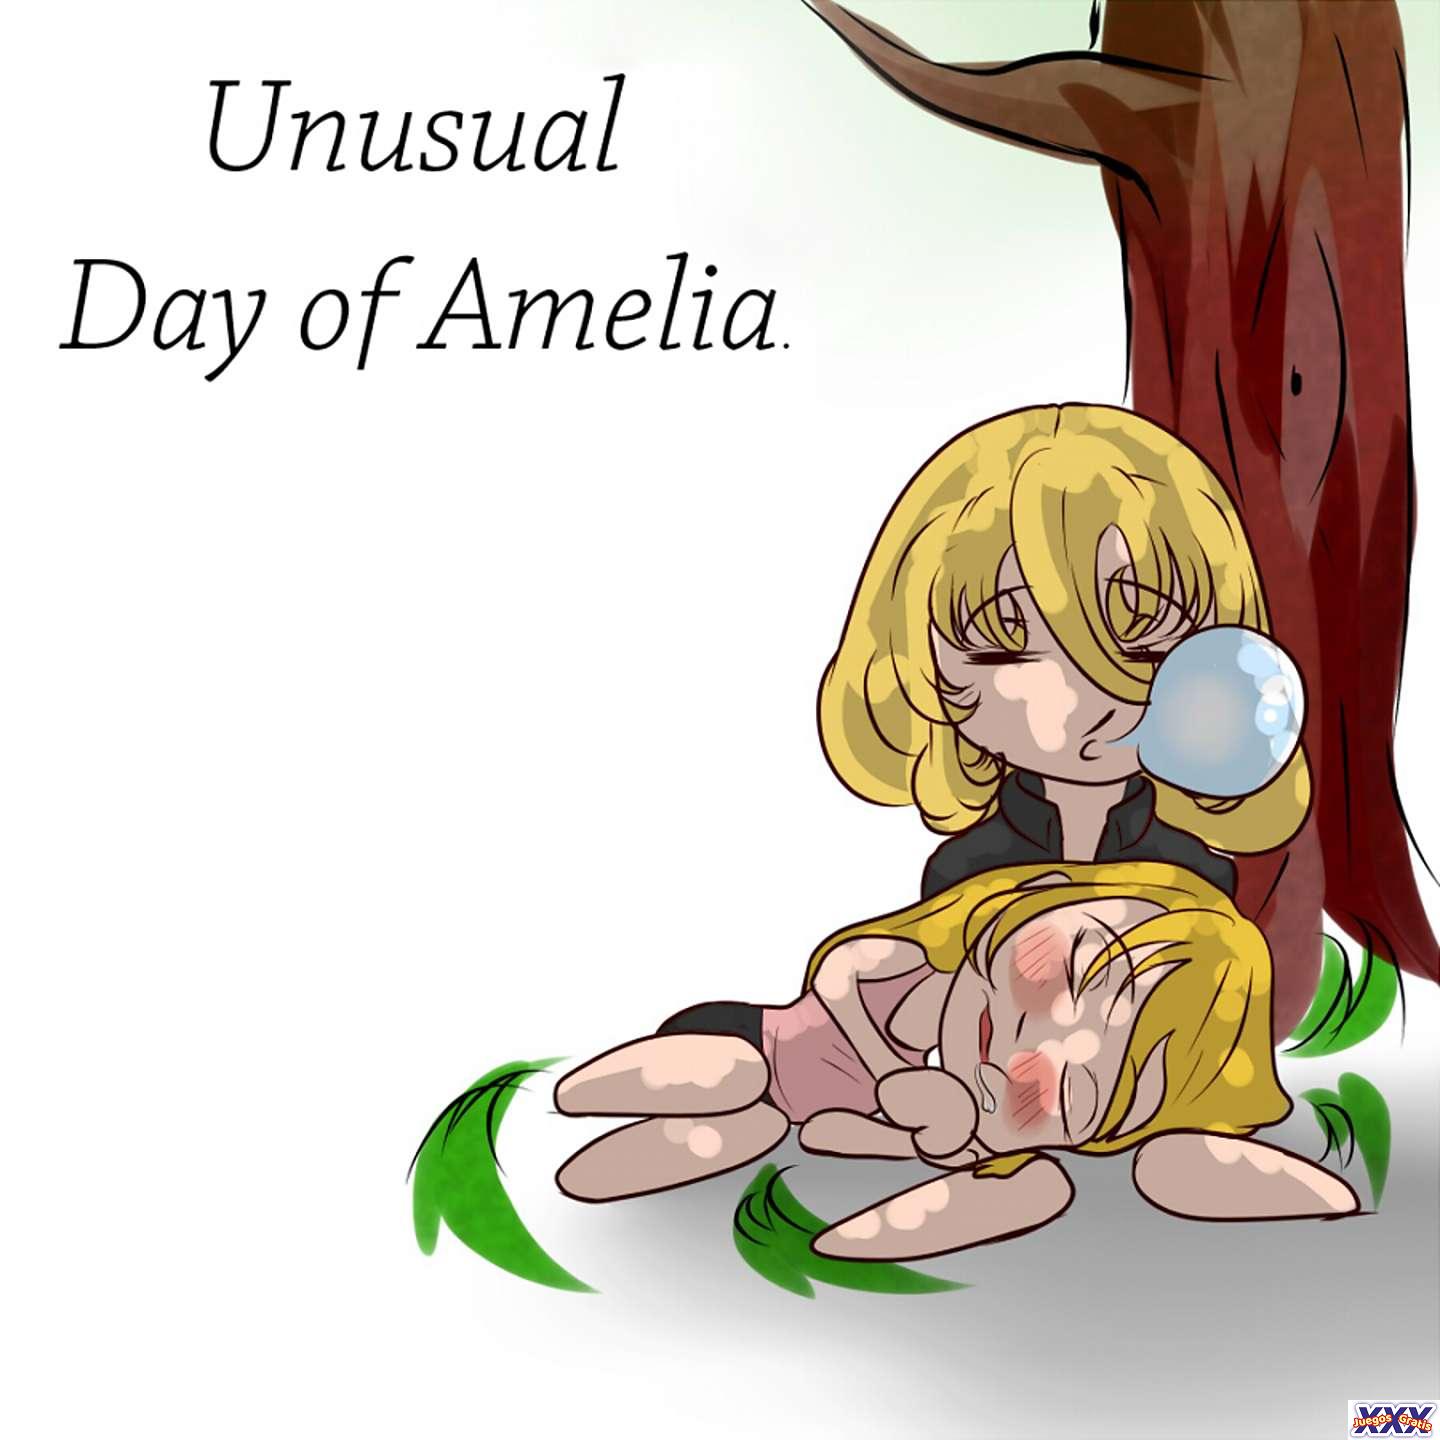 Unusual Day With Amelia [Shaso] [Final Version]